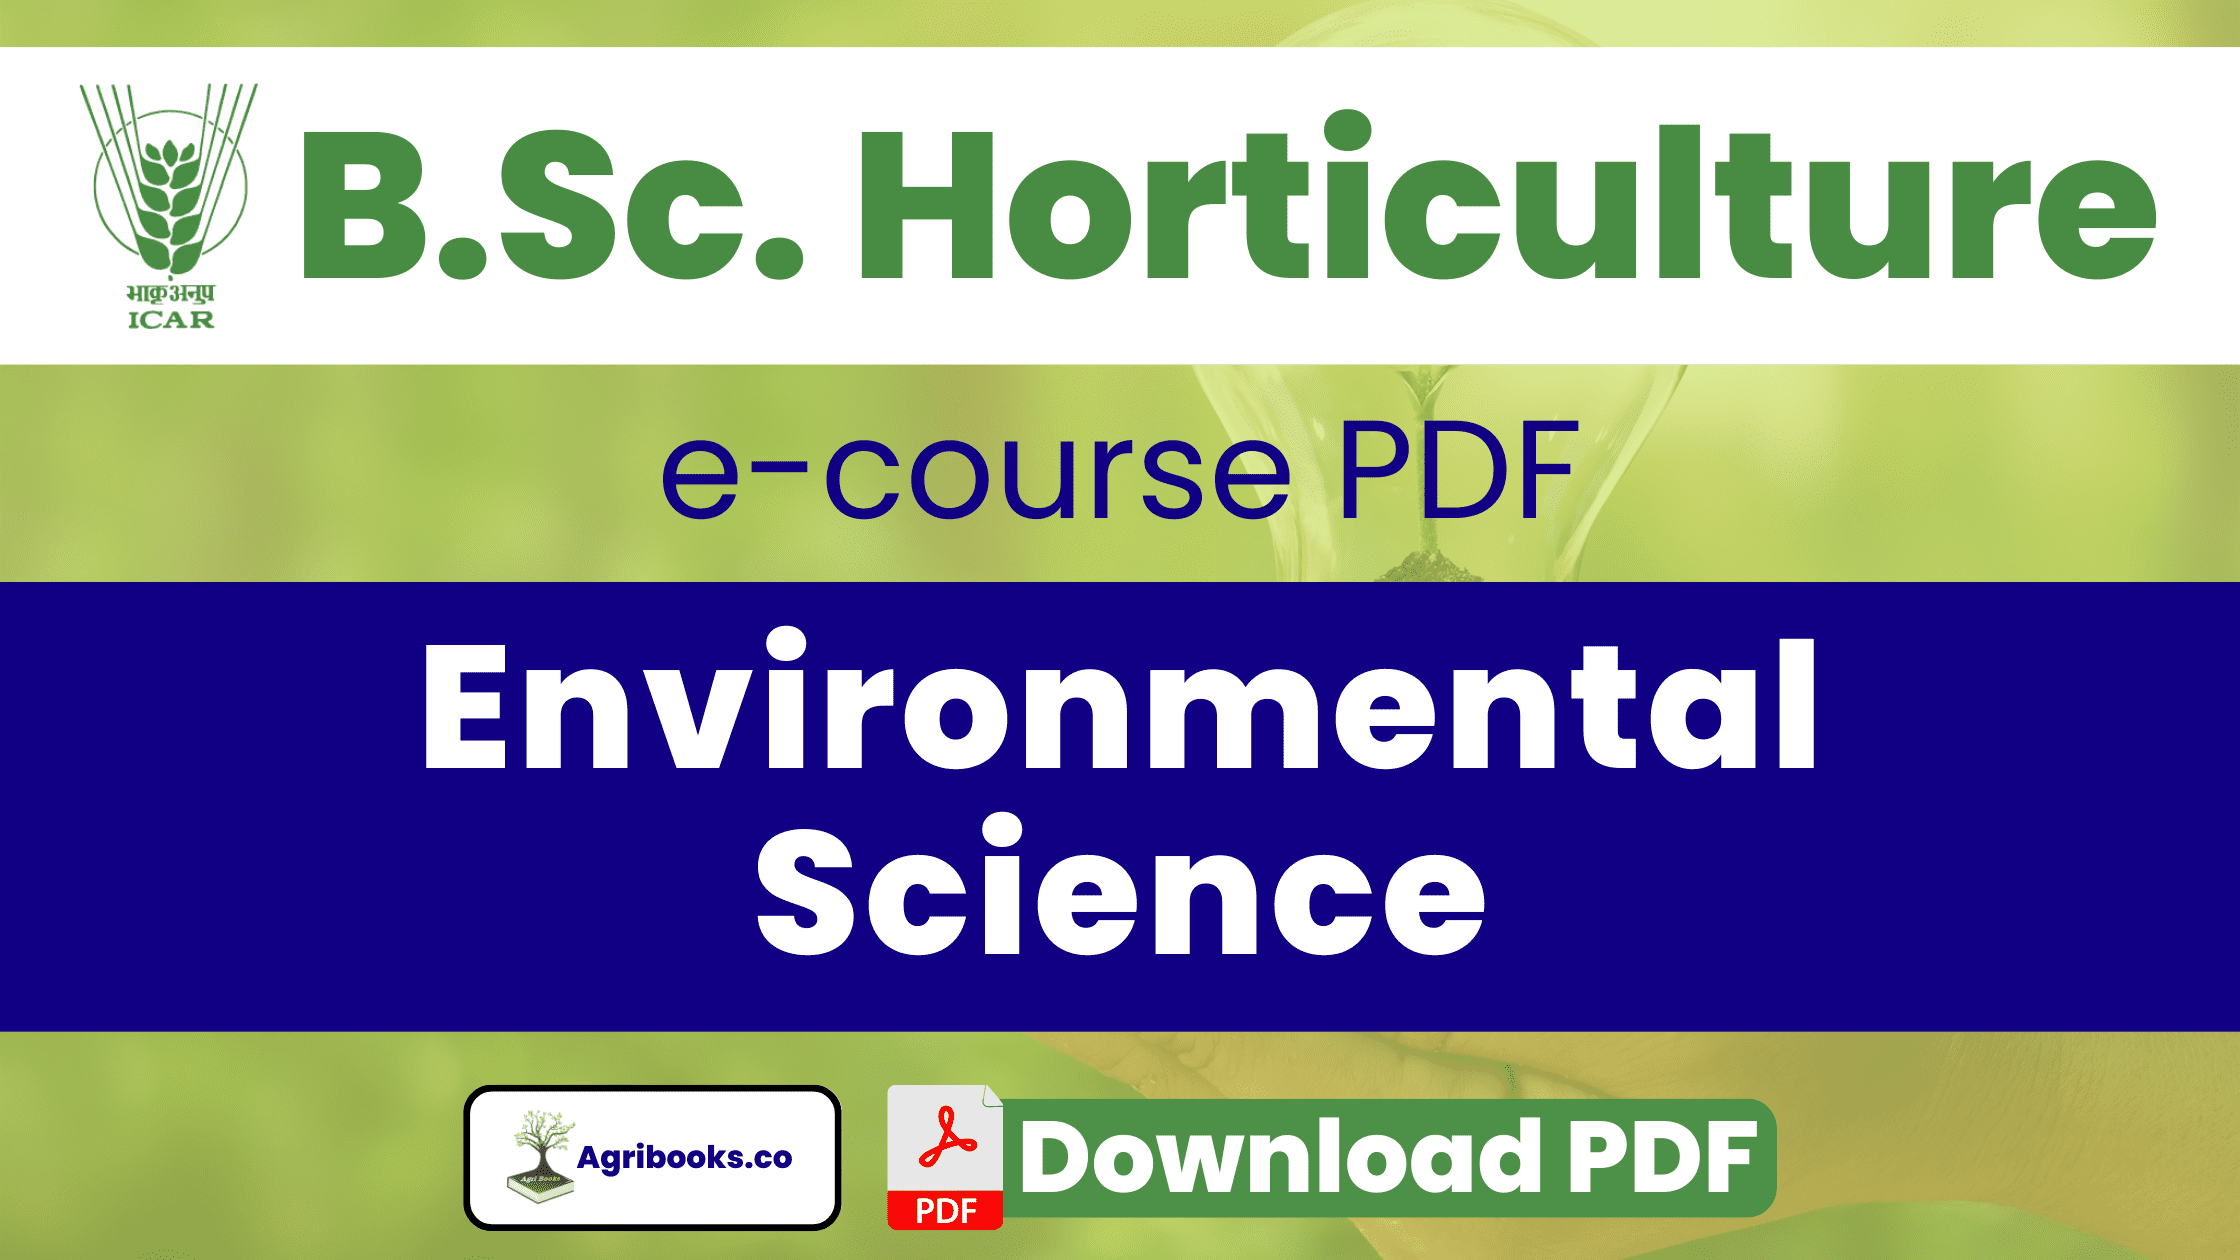 Environmental Science BSc Horticulture PDF Download